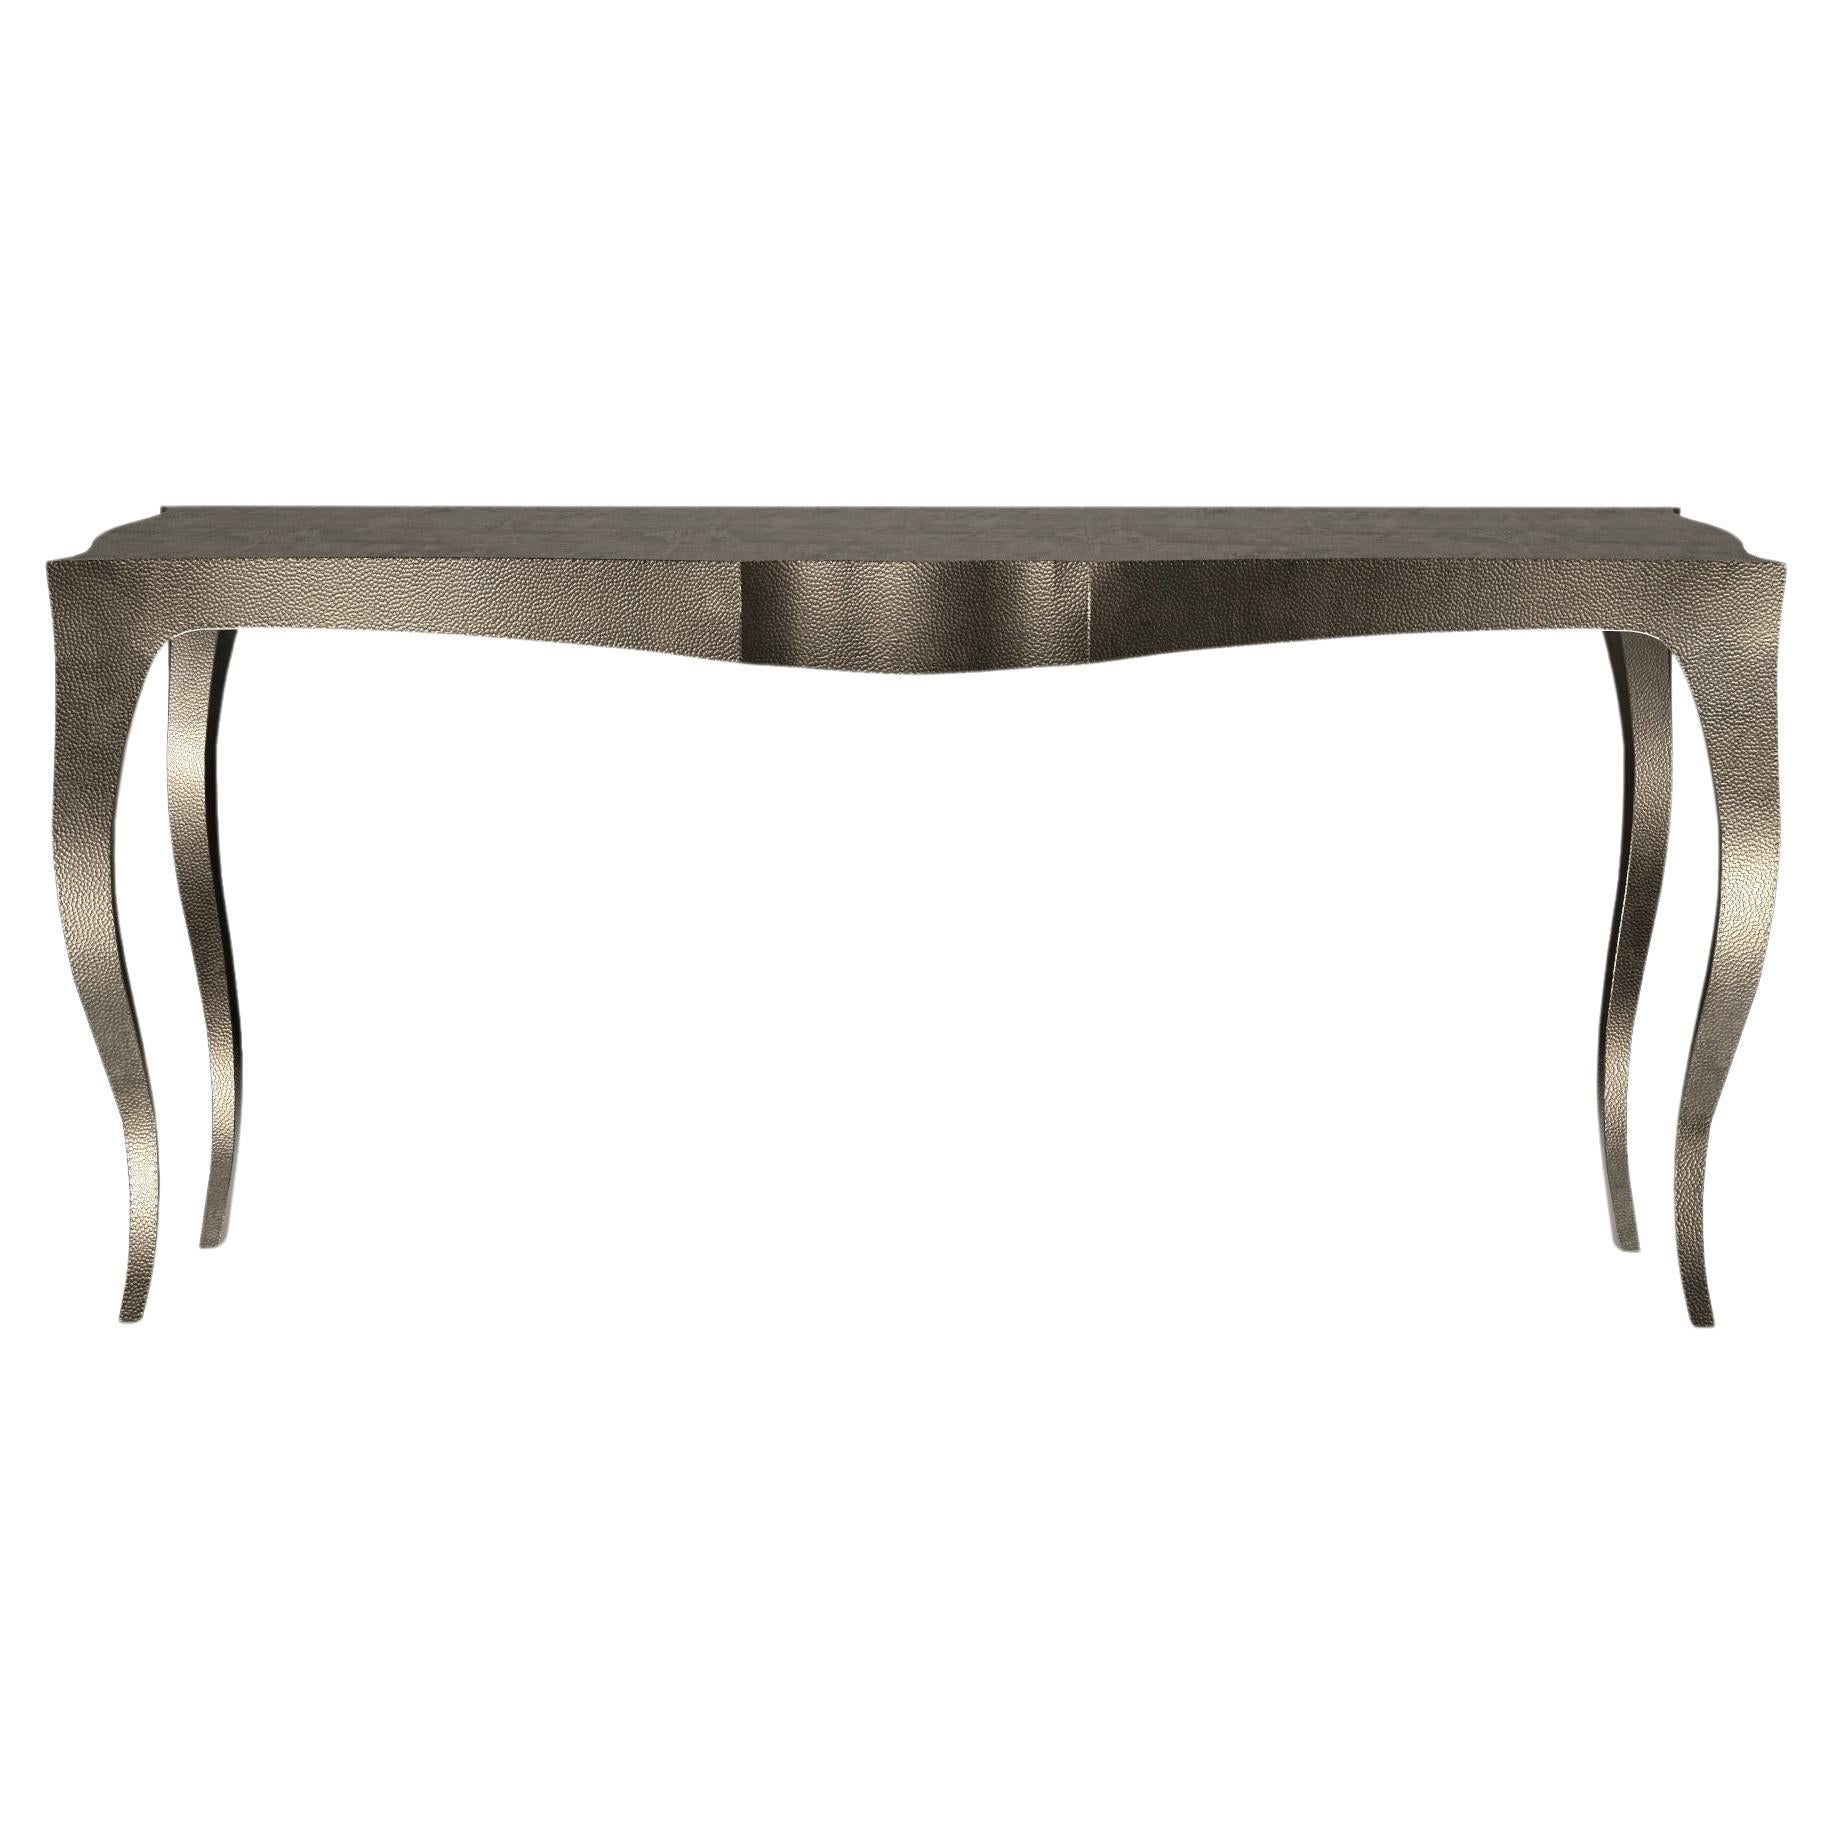 Louise Console Art Deco Conference Tables Mid. Hammered Antique Bronze